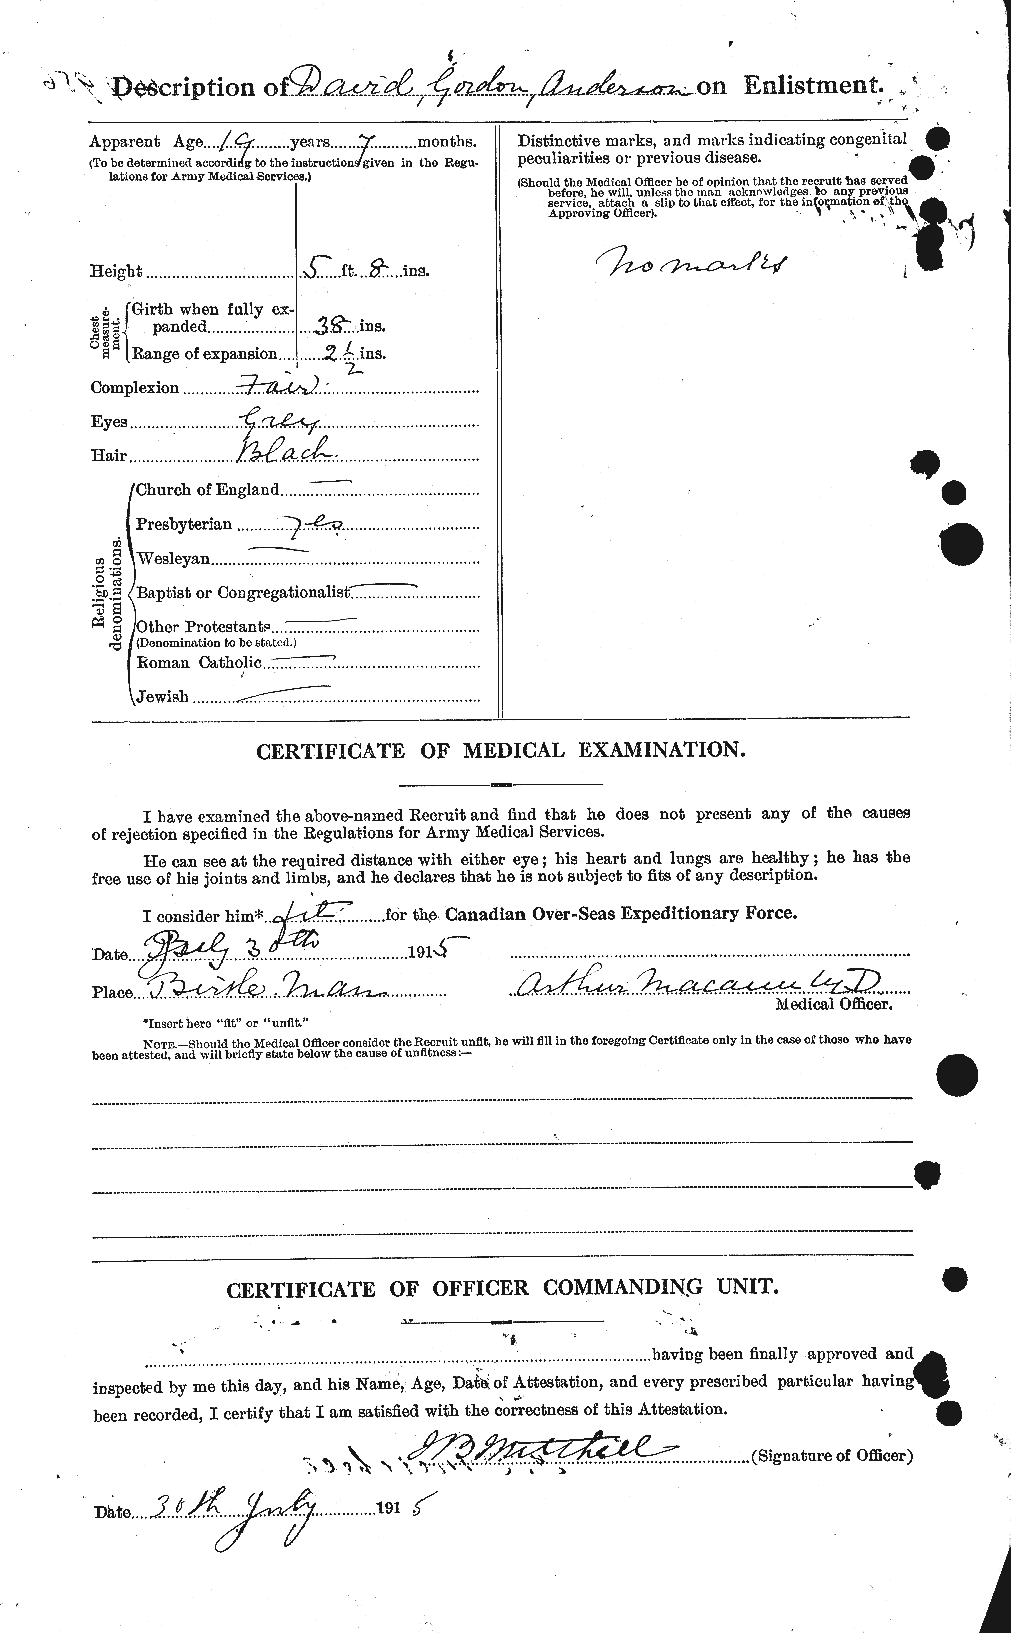 Personnel Records of the First World War - CEF 210012b